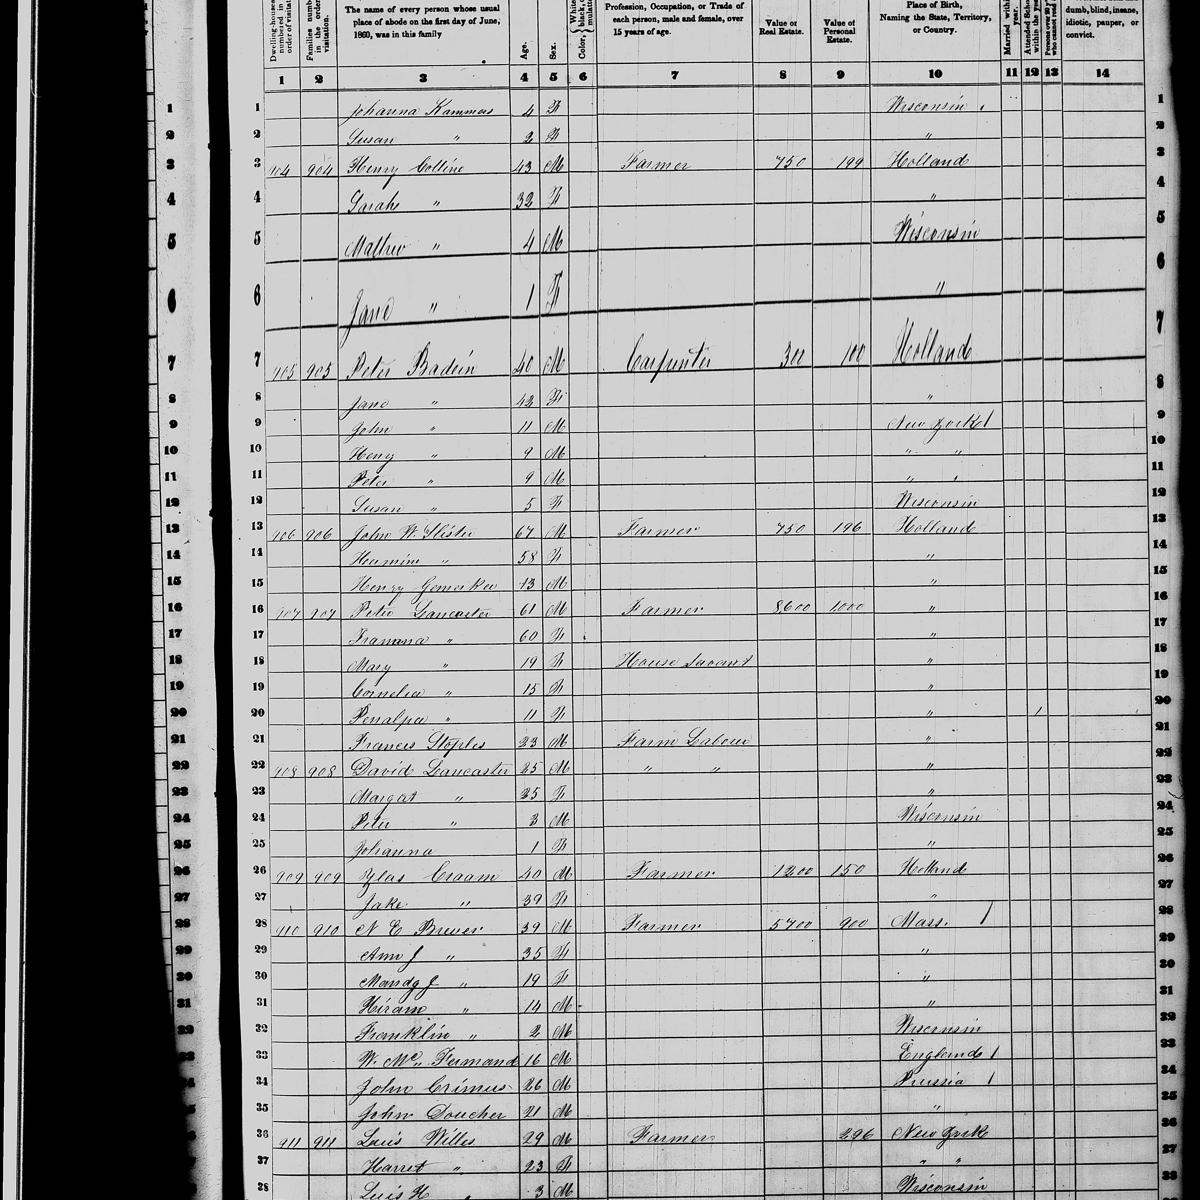 United States Census, 1860: Franklin, Milwaukee County, Wisconsin, sheet 123